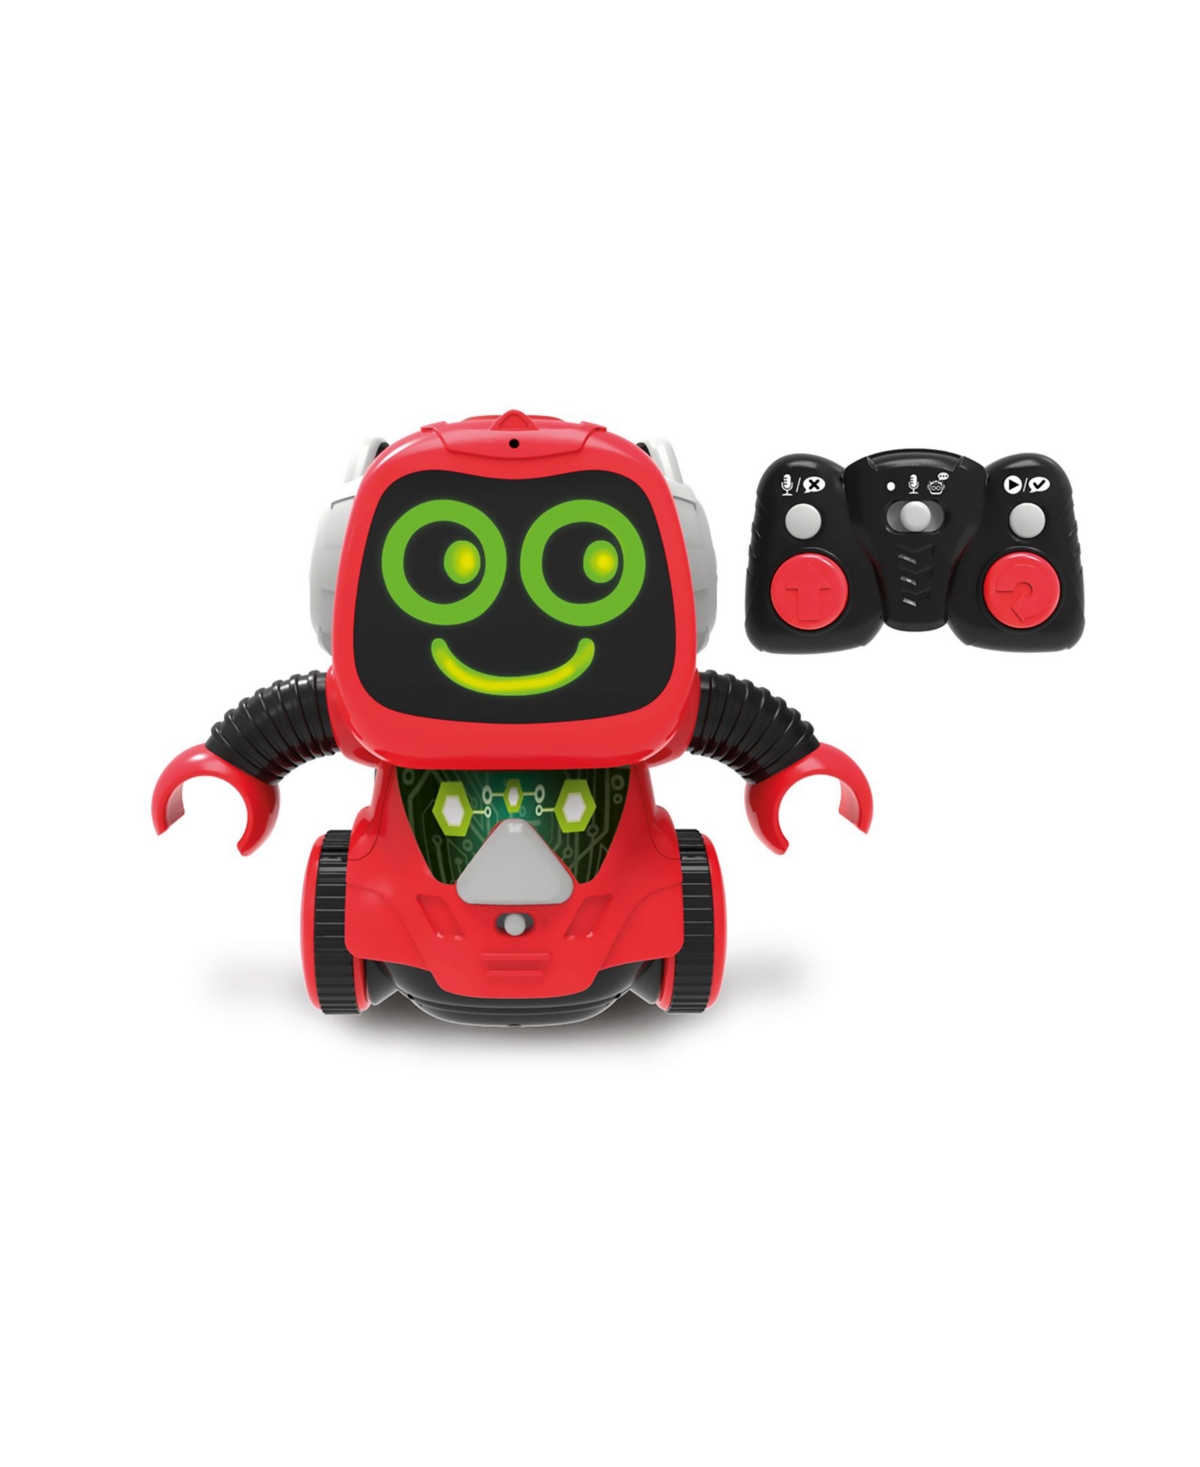 Winfun Kids' Rc Voice Changing Robot In Red